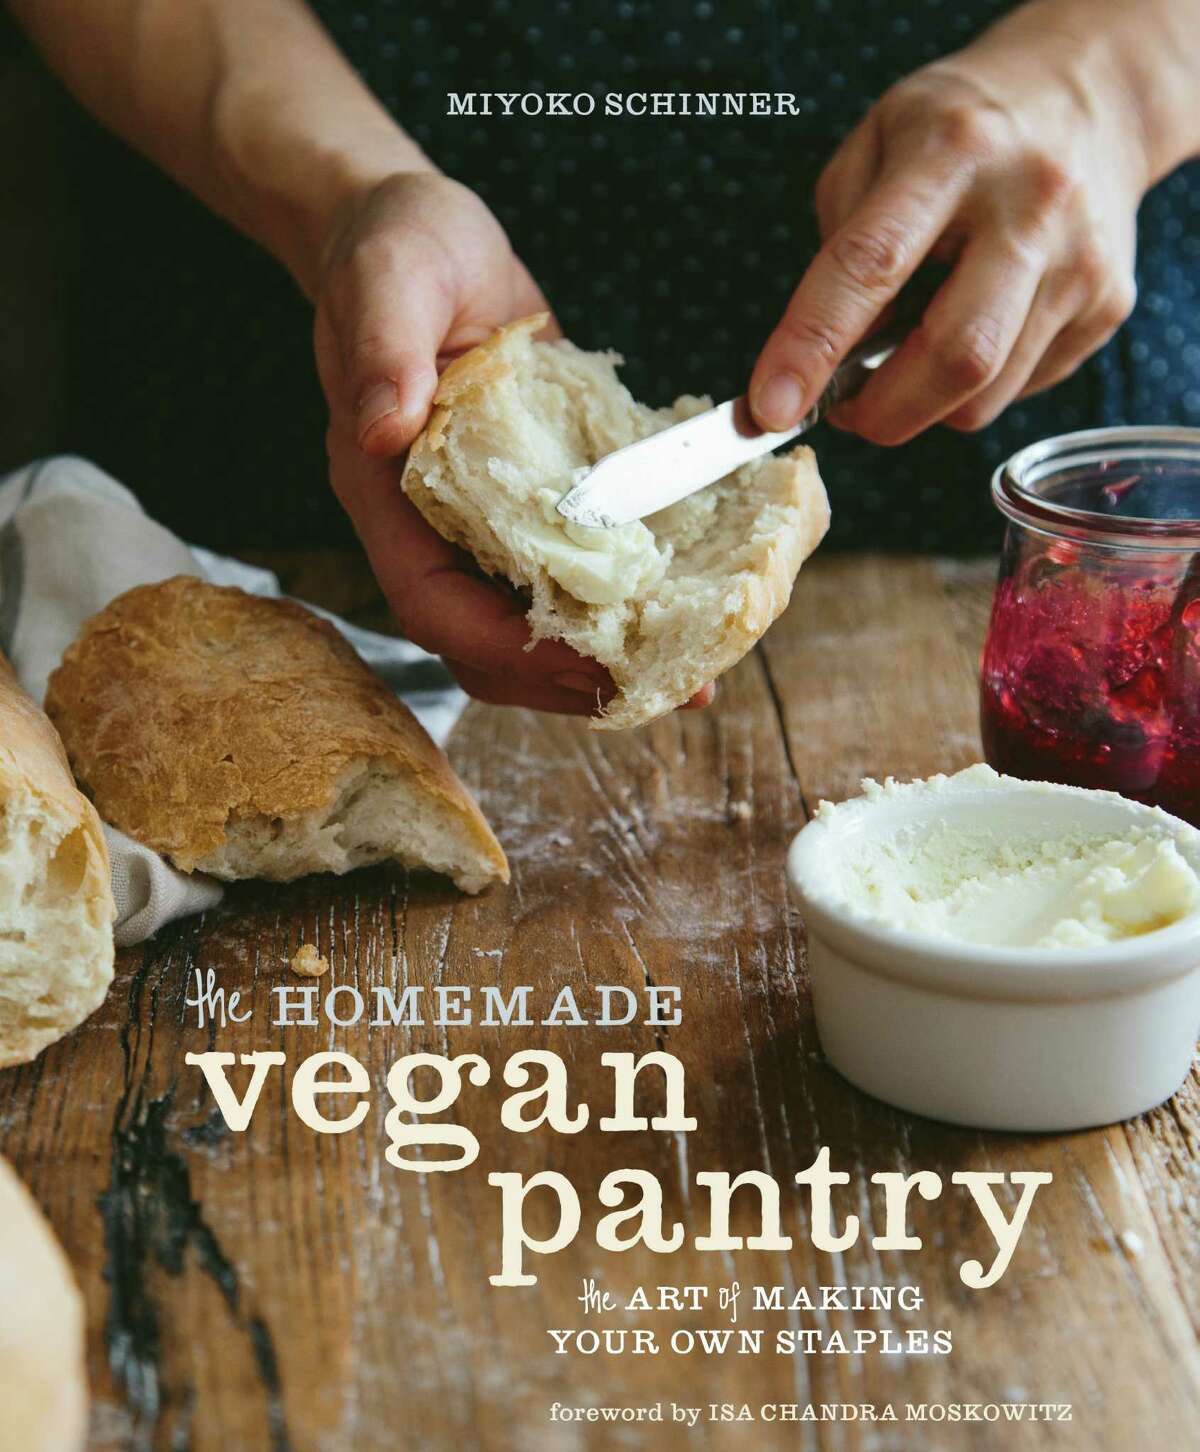 Reprinted from THE HOMEMADE VEGAN PANTRY Copyright Â 2015 by Miyoko Schinner. Photographs Â 2015 by Eva Kolenko. Published by Ten Speed Press, an imprint of Penguin Random House LLC. $22.99, 223 pages